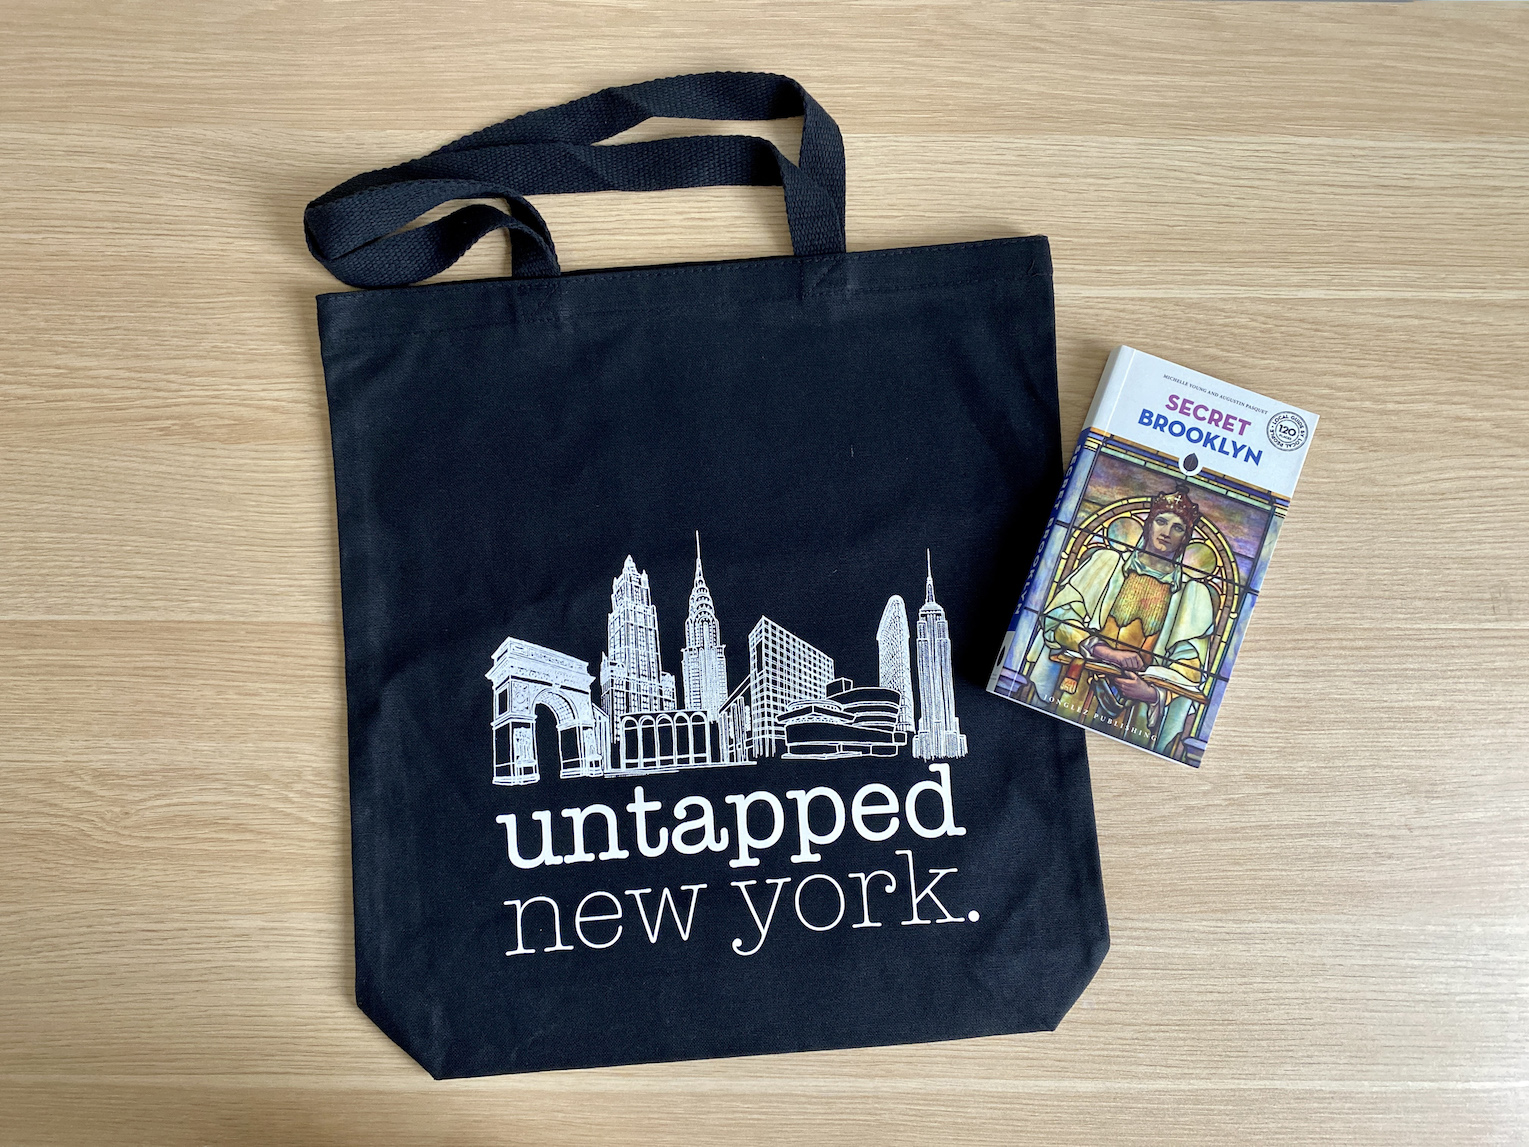 Untapped New York tote bag and book